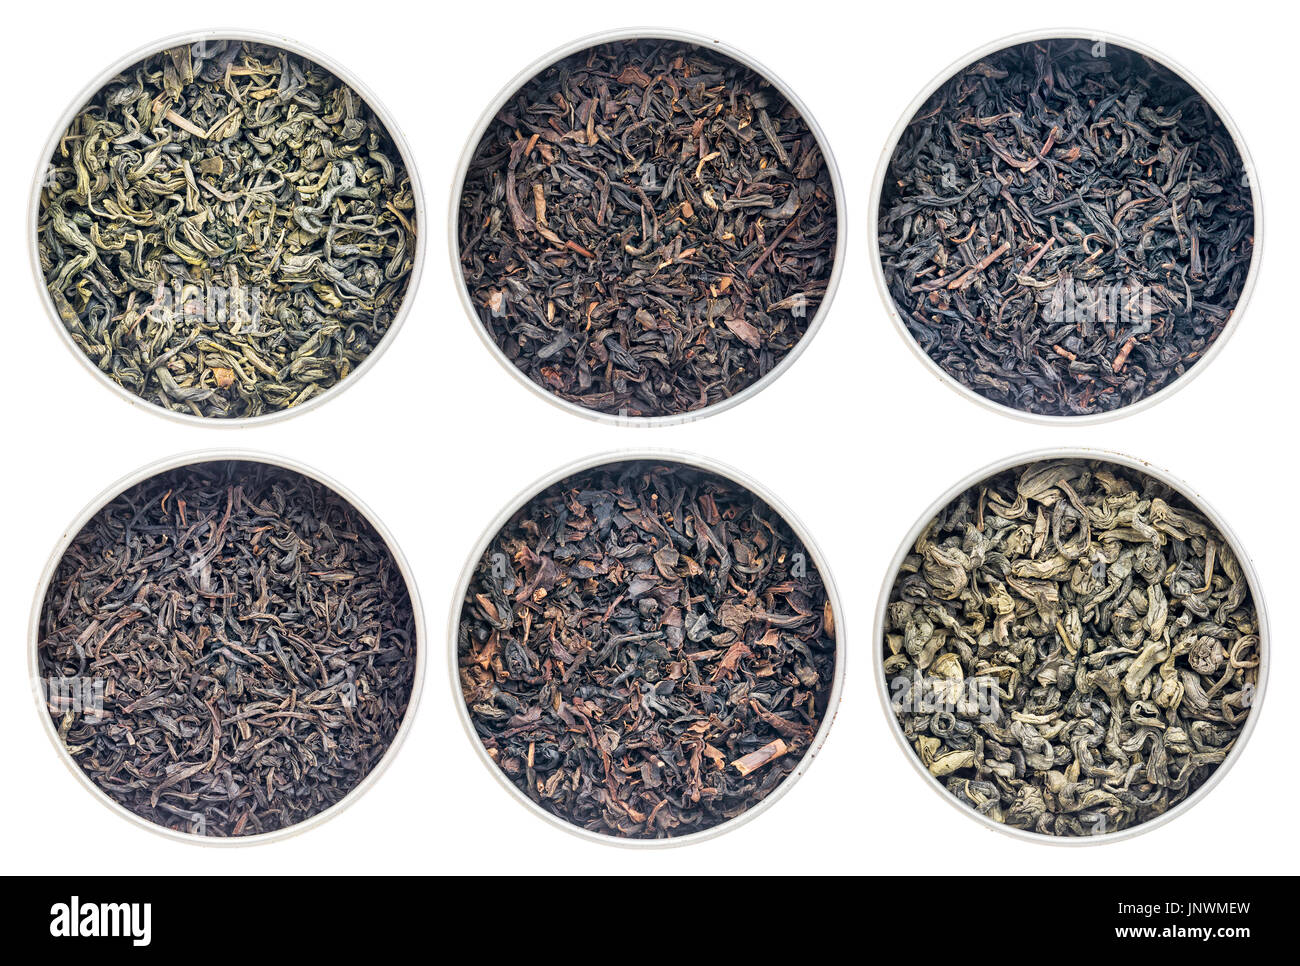 six historical loose leaf black (bohea, oolong, souchong, congou) and green (hyson, singlo) tea collection, the same type thrown over during the Bosto Stock Photo